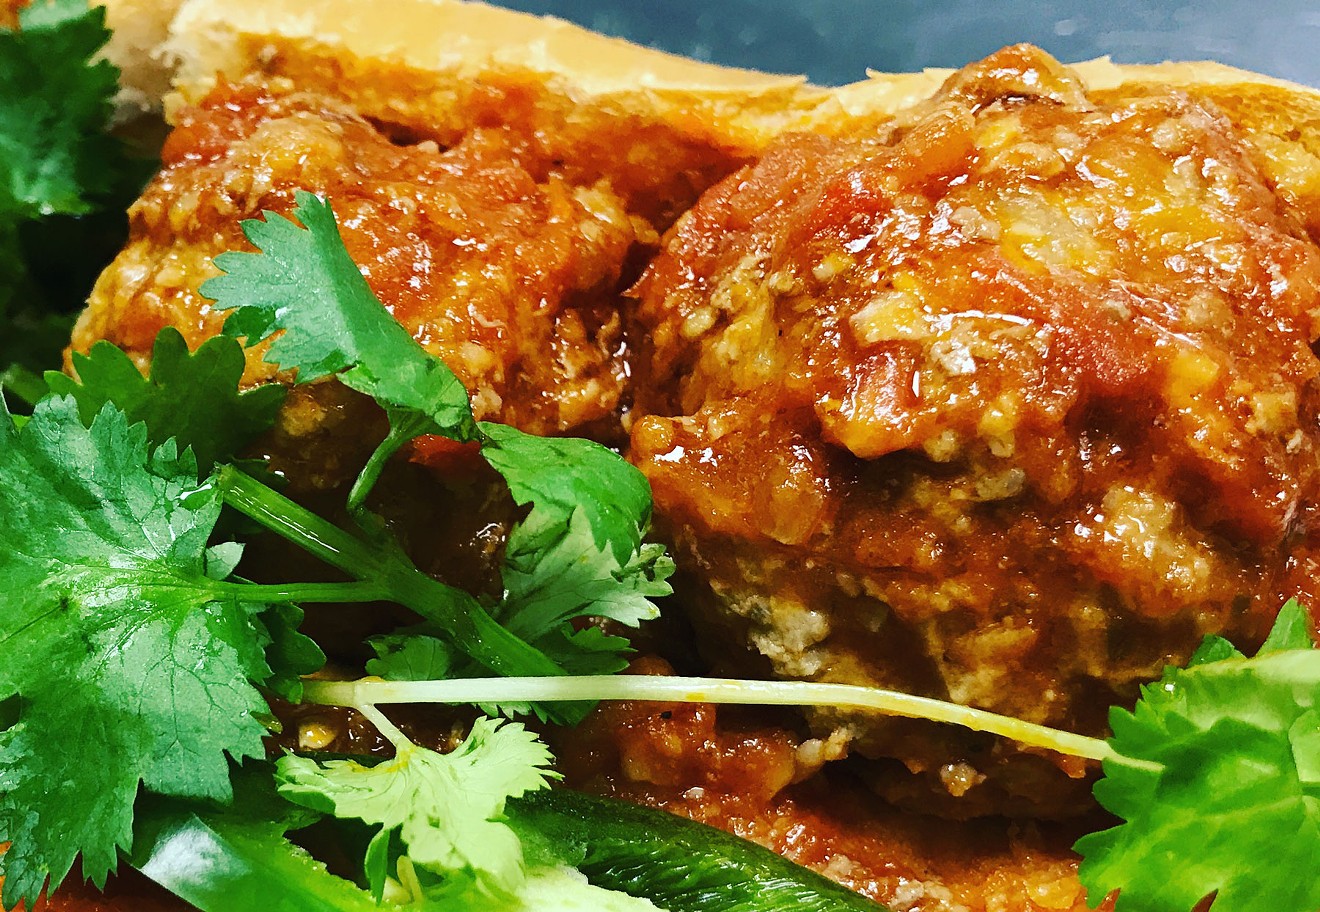 The chef's special, Vietnamese pork meatballs served in a banh mi with cilantro and jalapeño for $12.